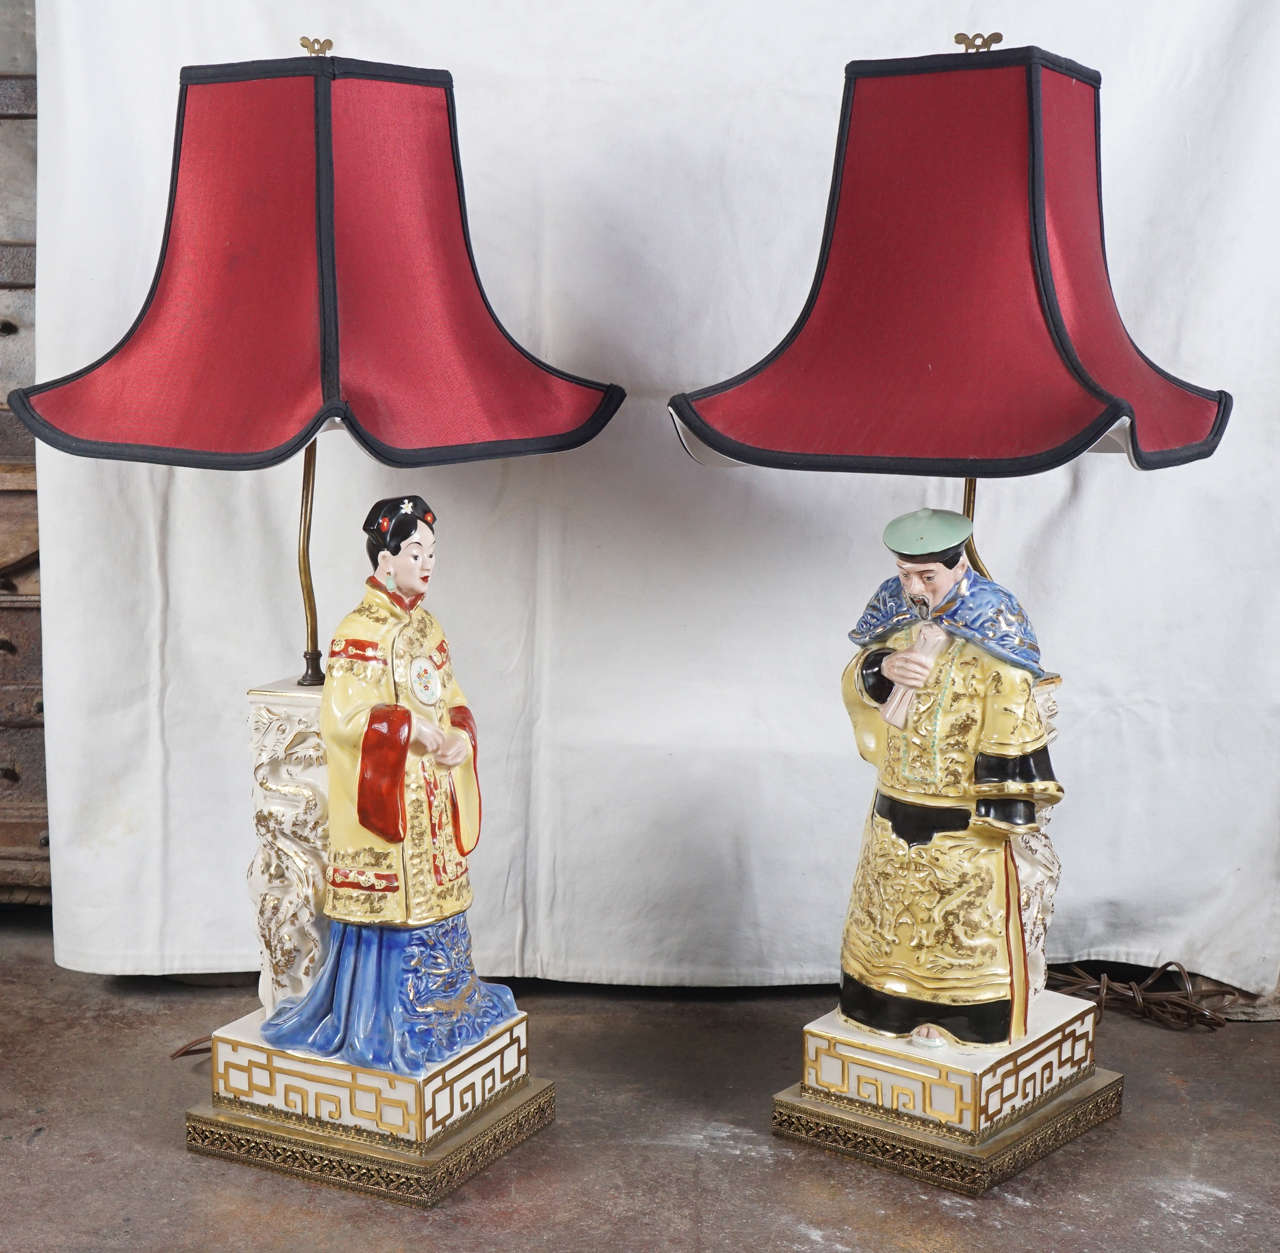 Hand-painted ceramic lamps from Italy.
Height of Figure: 29 inches 
Height to Shades: 36 inches